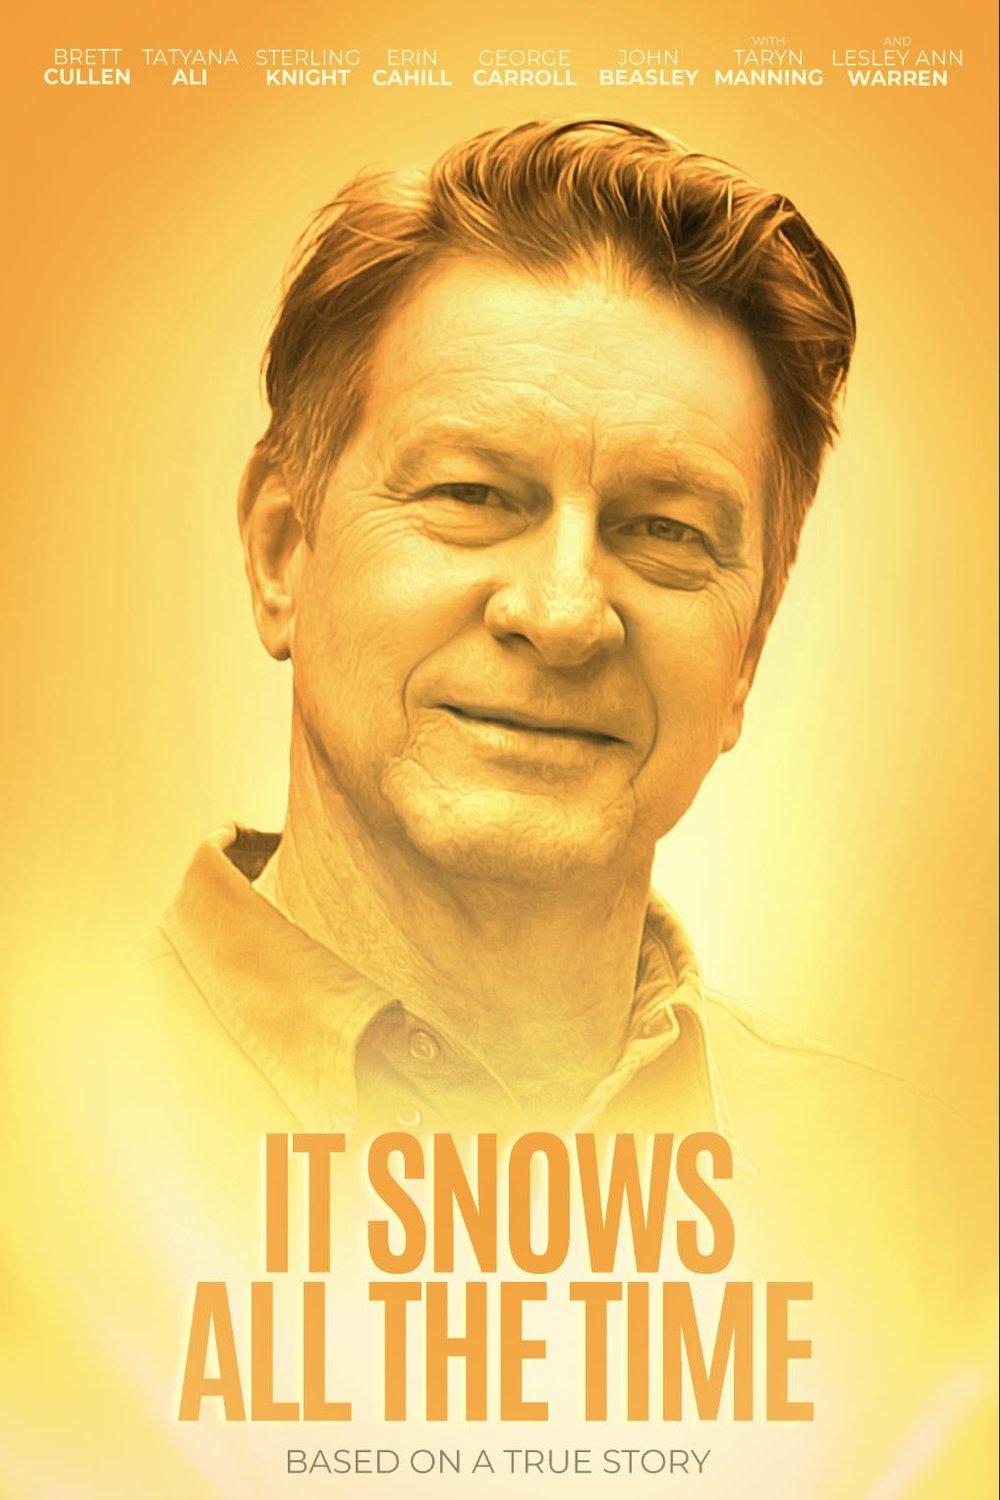 Poster of the movie It Snows All the Time